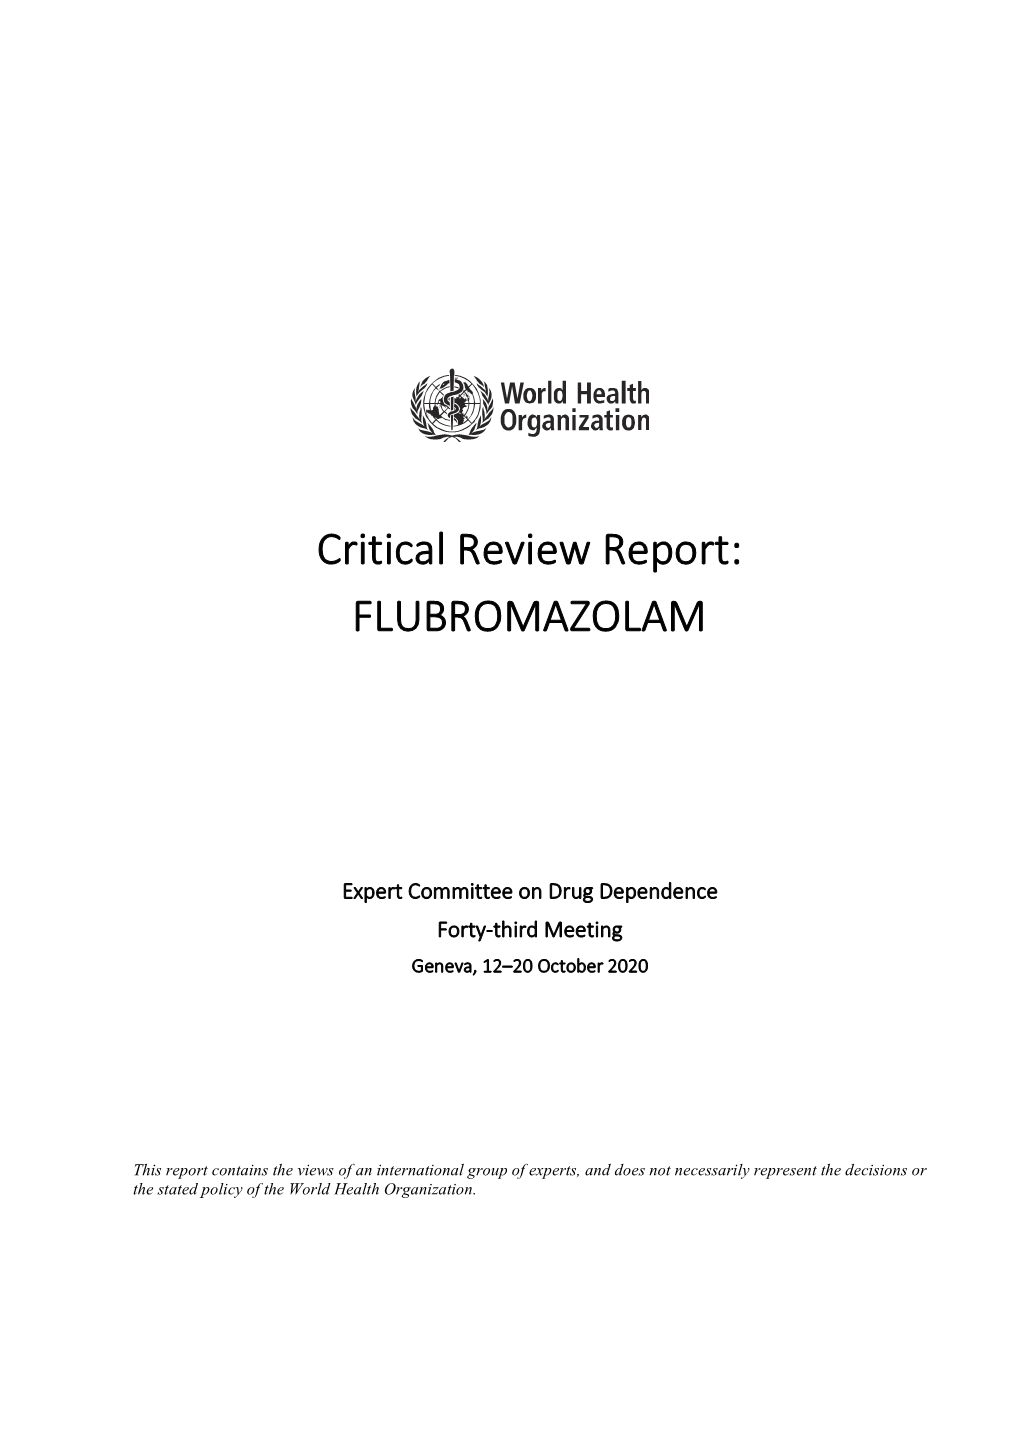 Critical Review Report: FLUBROMAZOLAM